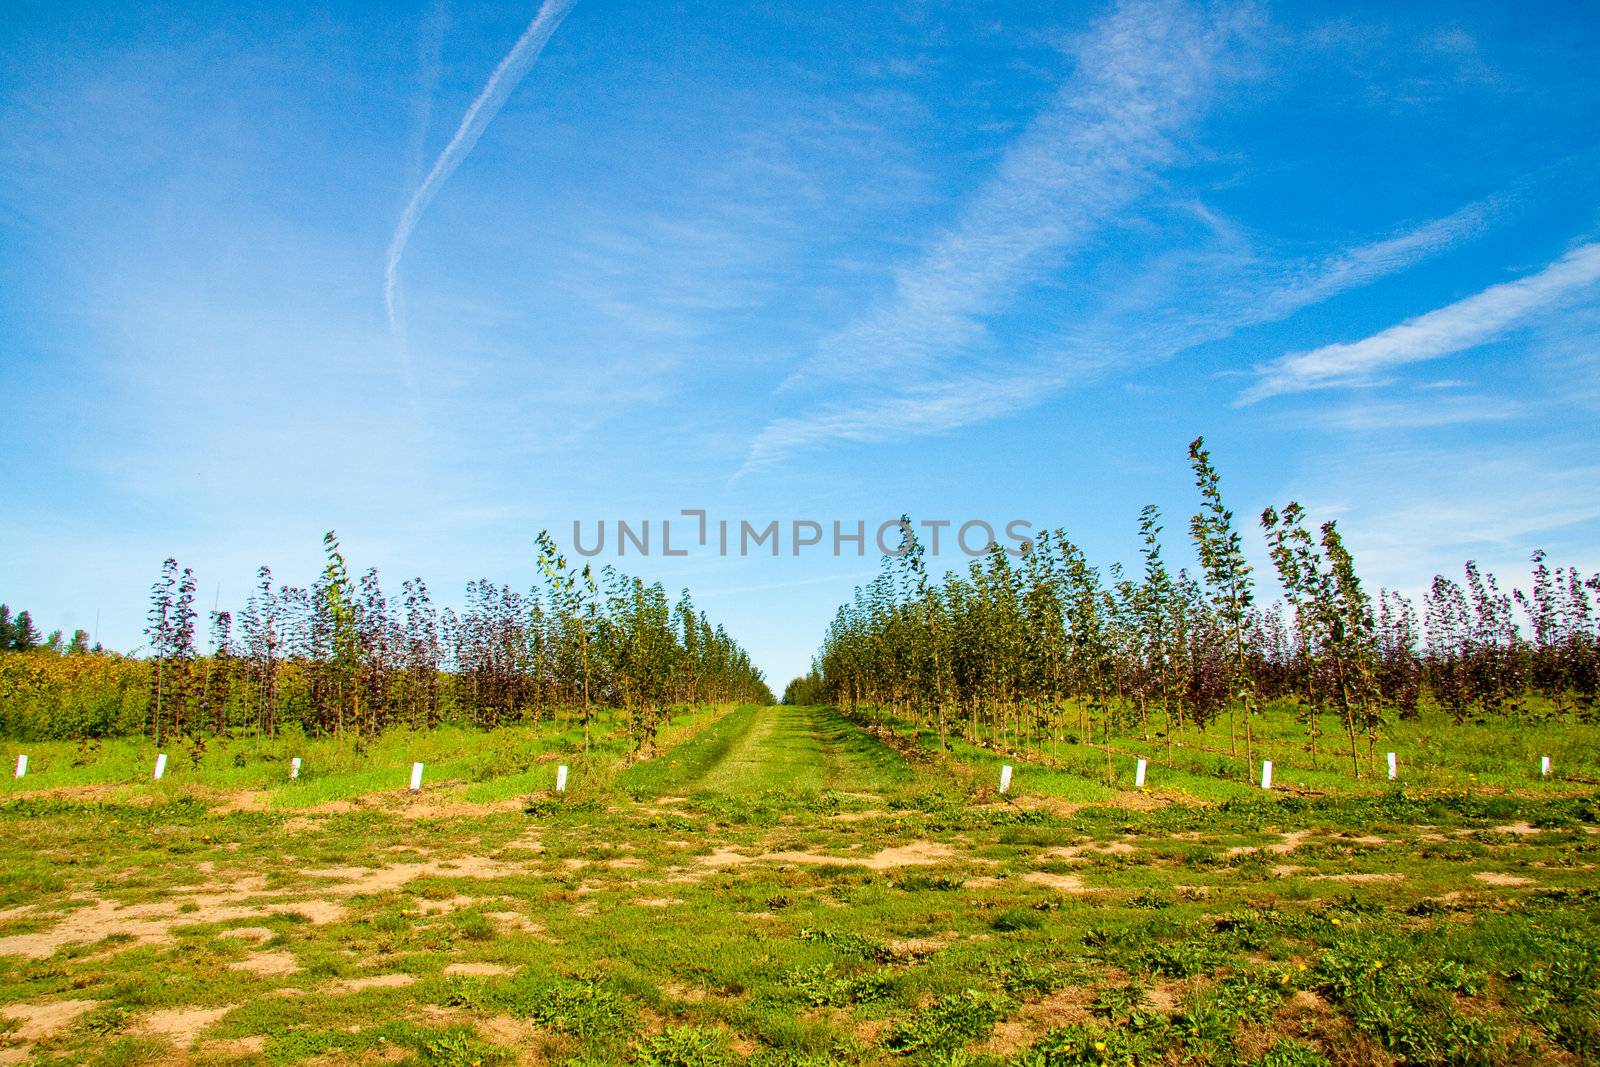 Trees are grown in lines and rows at a rural tree farm nursery in Oregon.